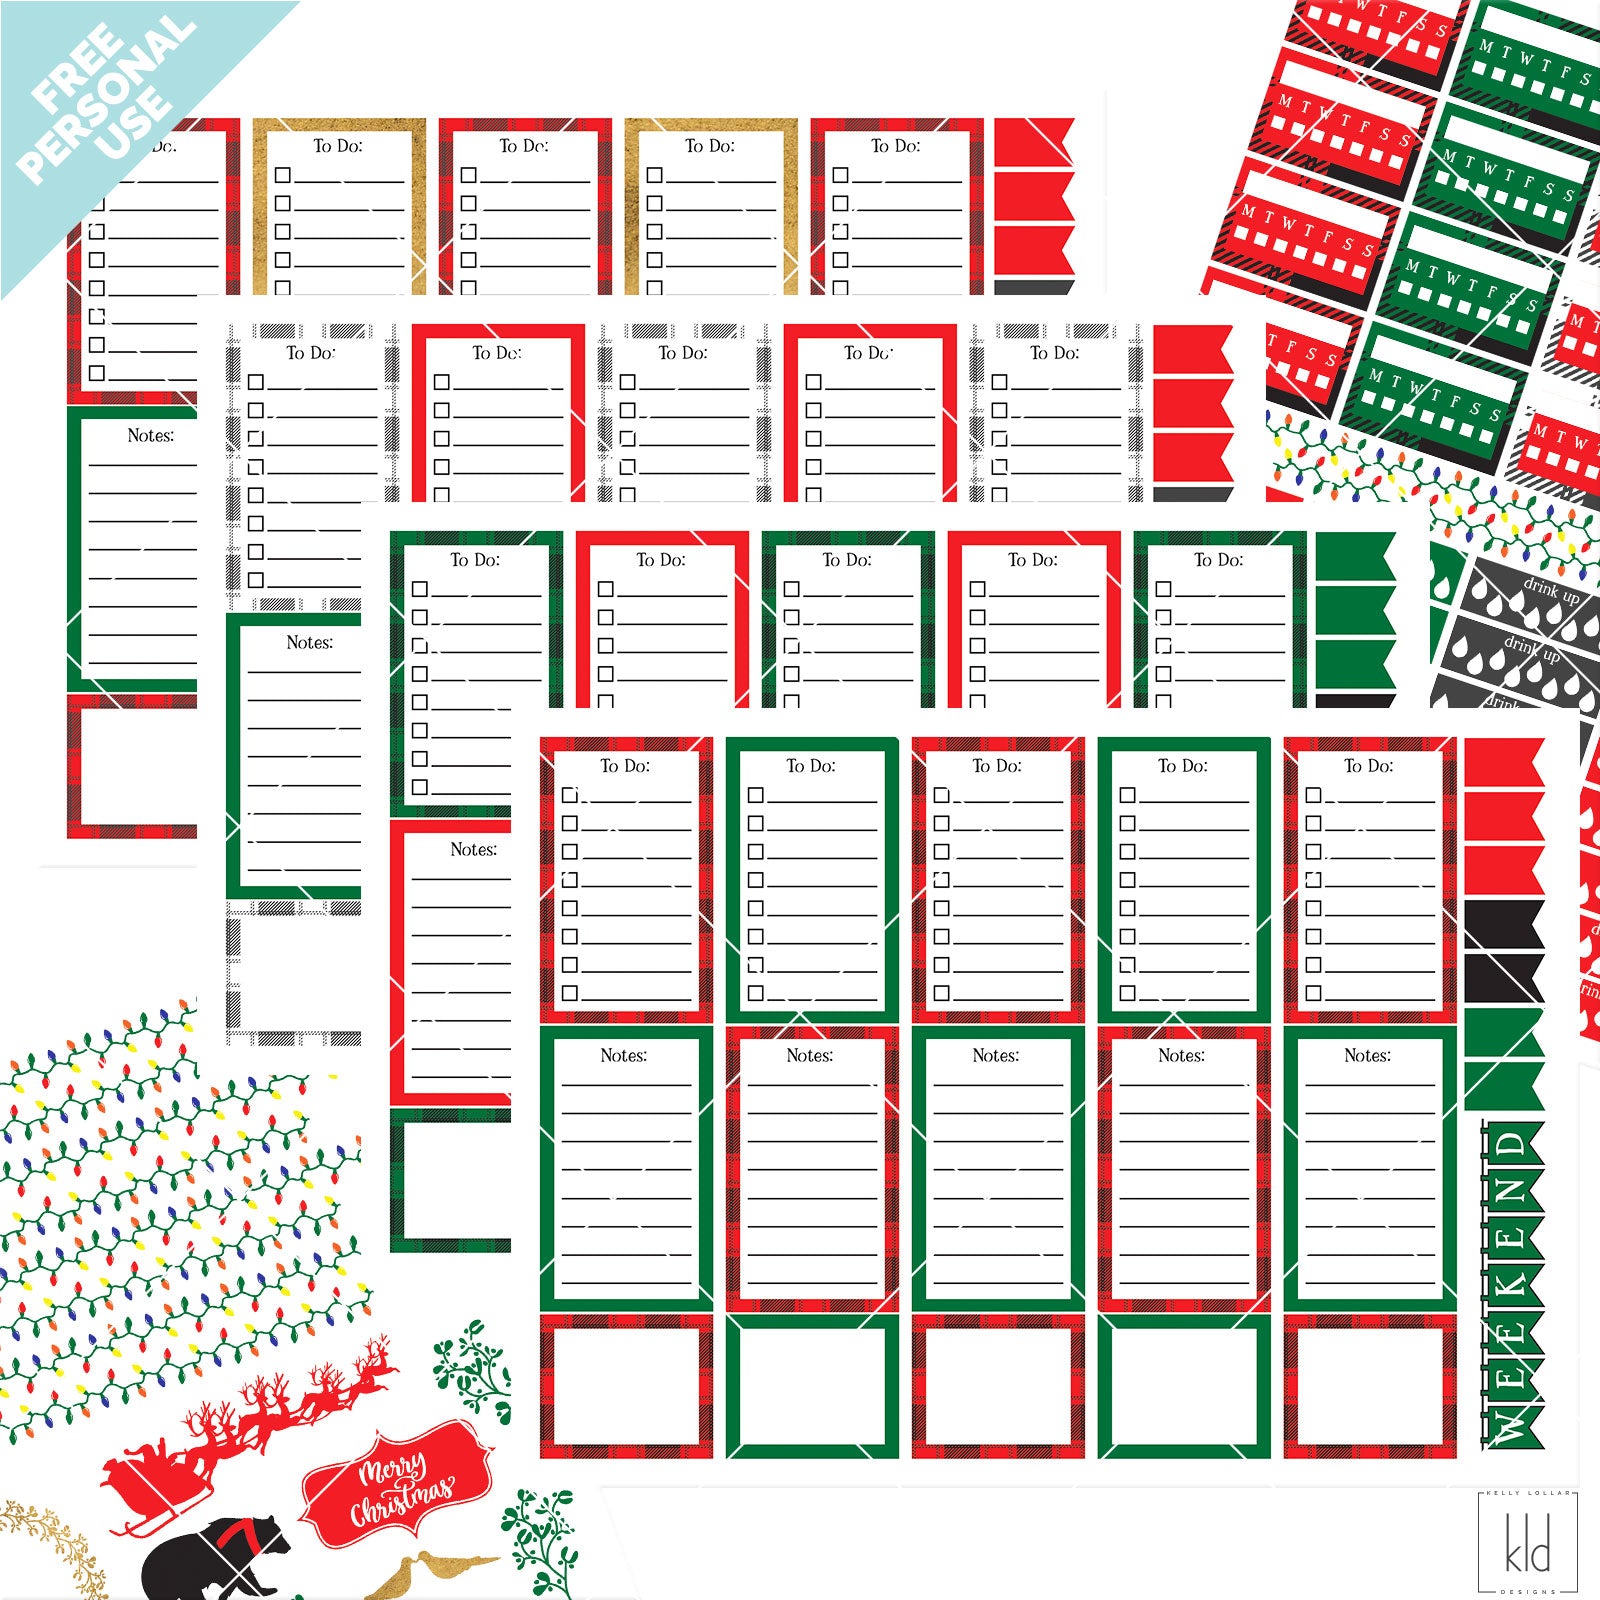 Monthly Freebie - December Planner Stickers with four different buffalo plaid patterns, trackers, doodle sheet and more - Free for Personal Use